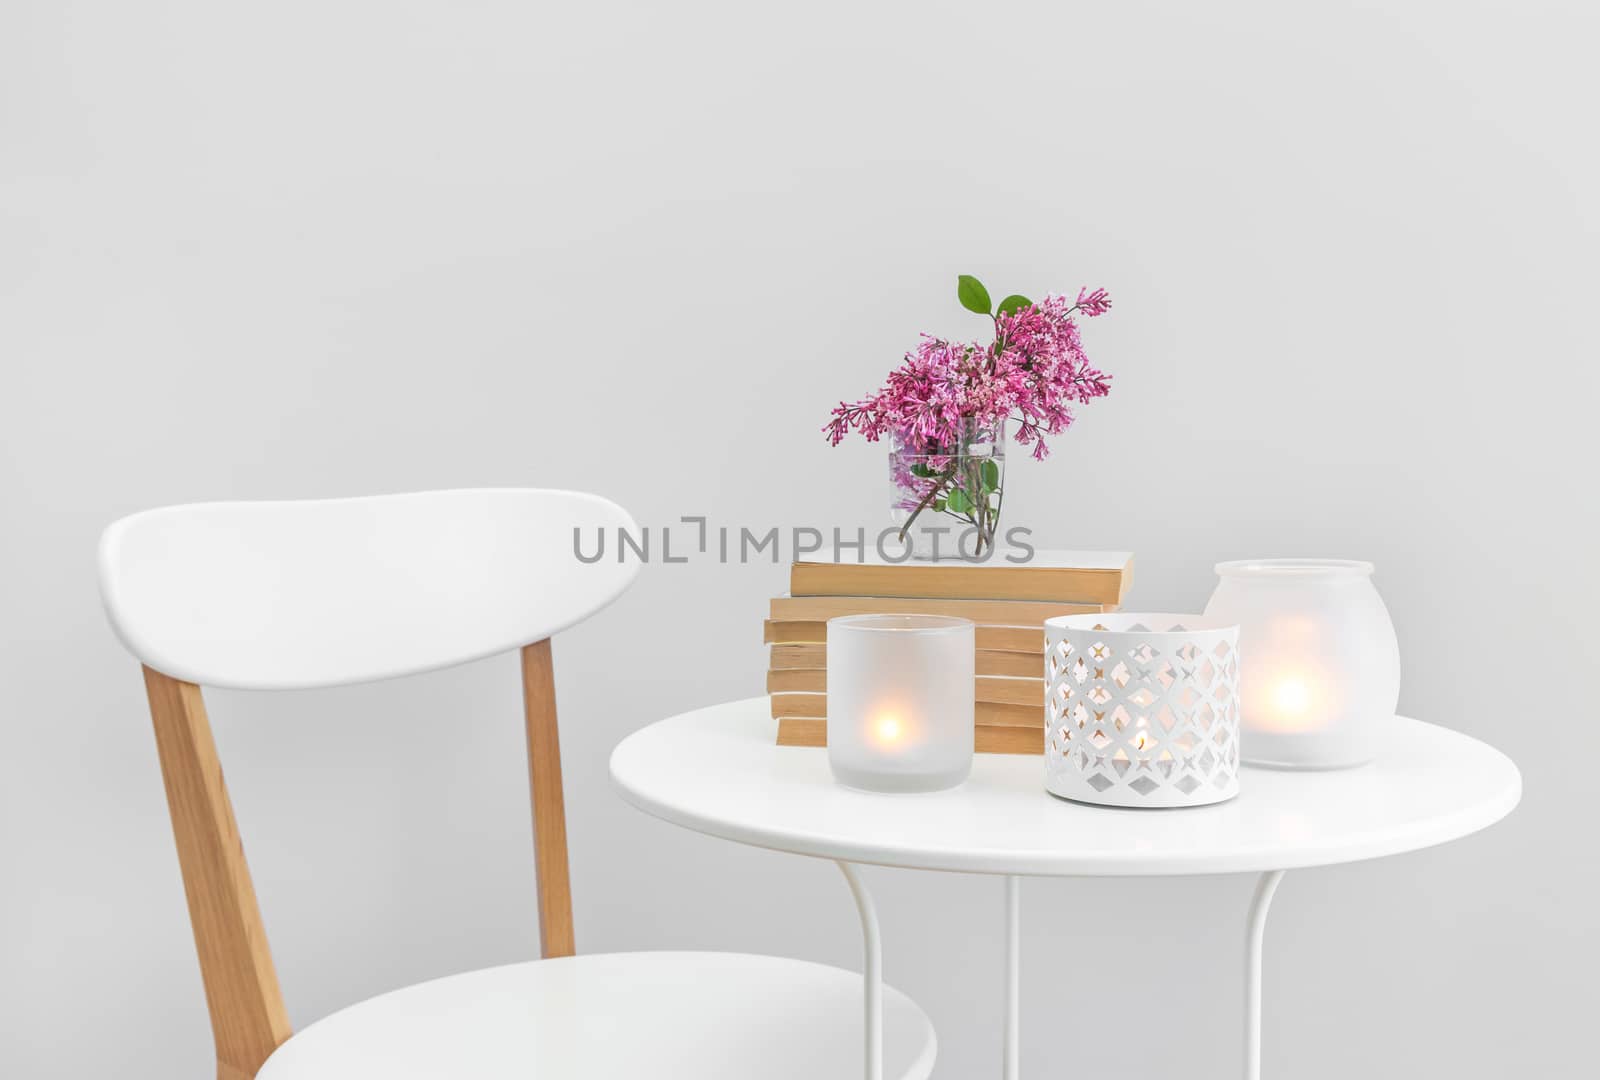 Candle lights, books and flowers on a white table by anikasalsera